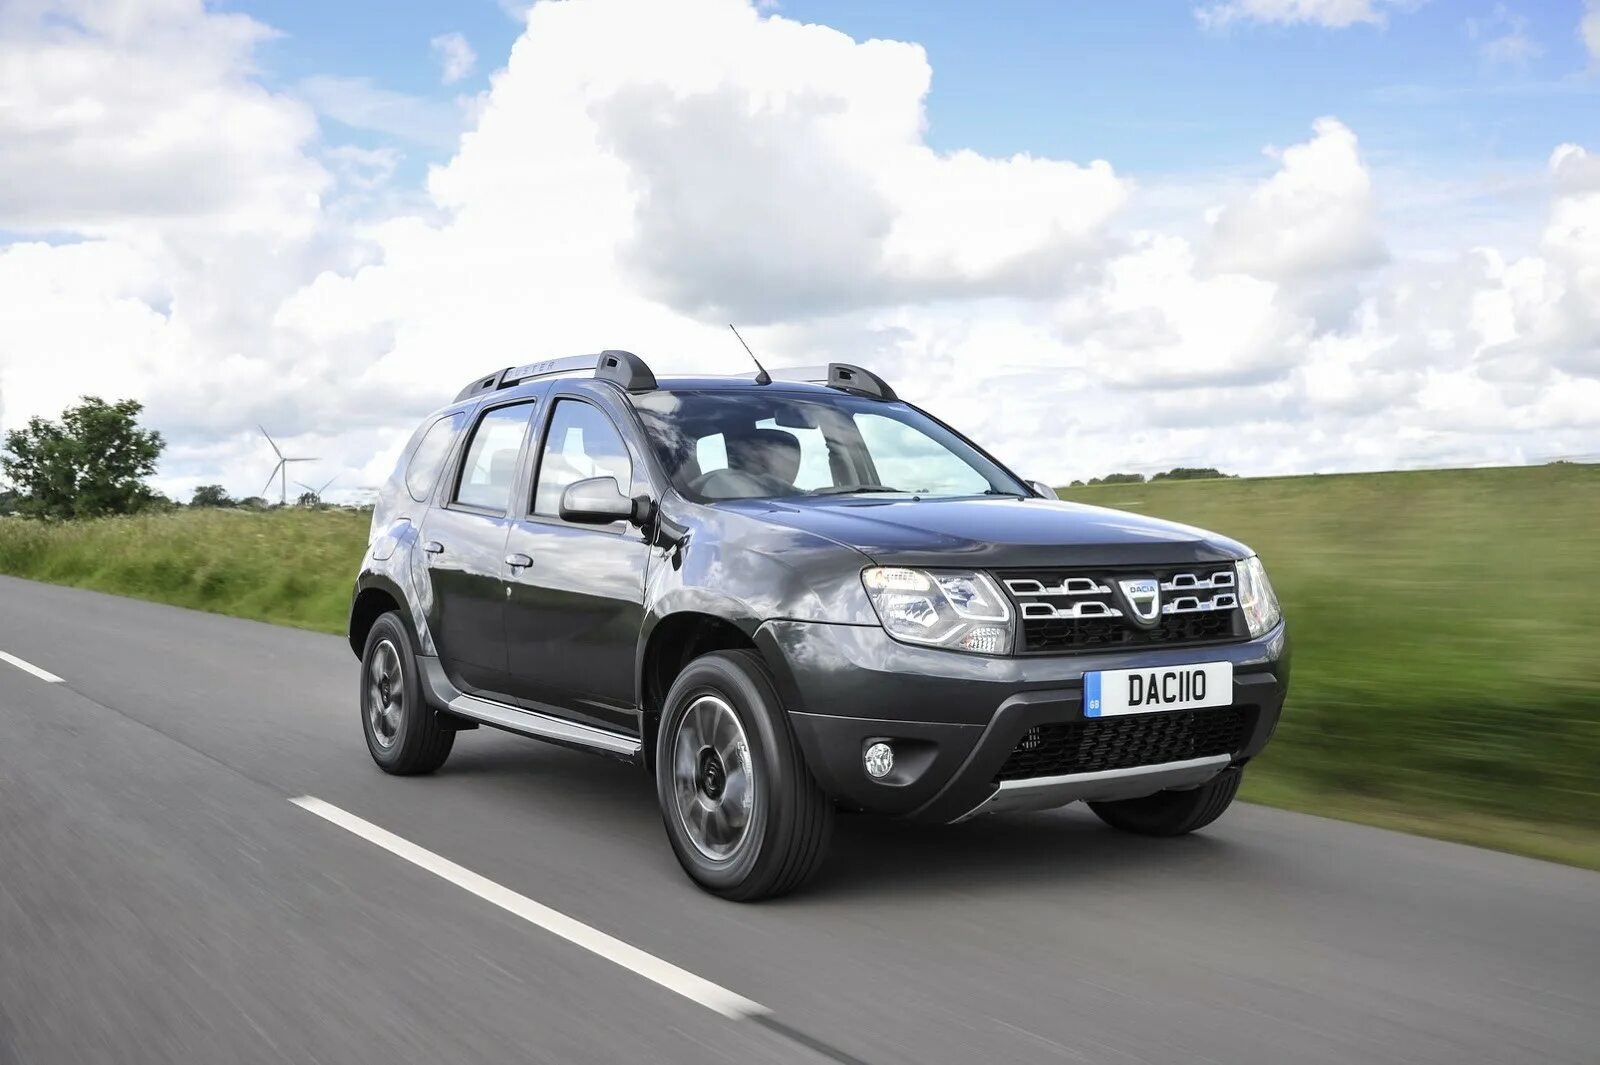 Dacia Duster 2016. Renault Duster 22. Рено Дастер 2016. Renault Dacia Duster.